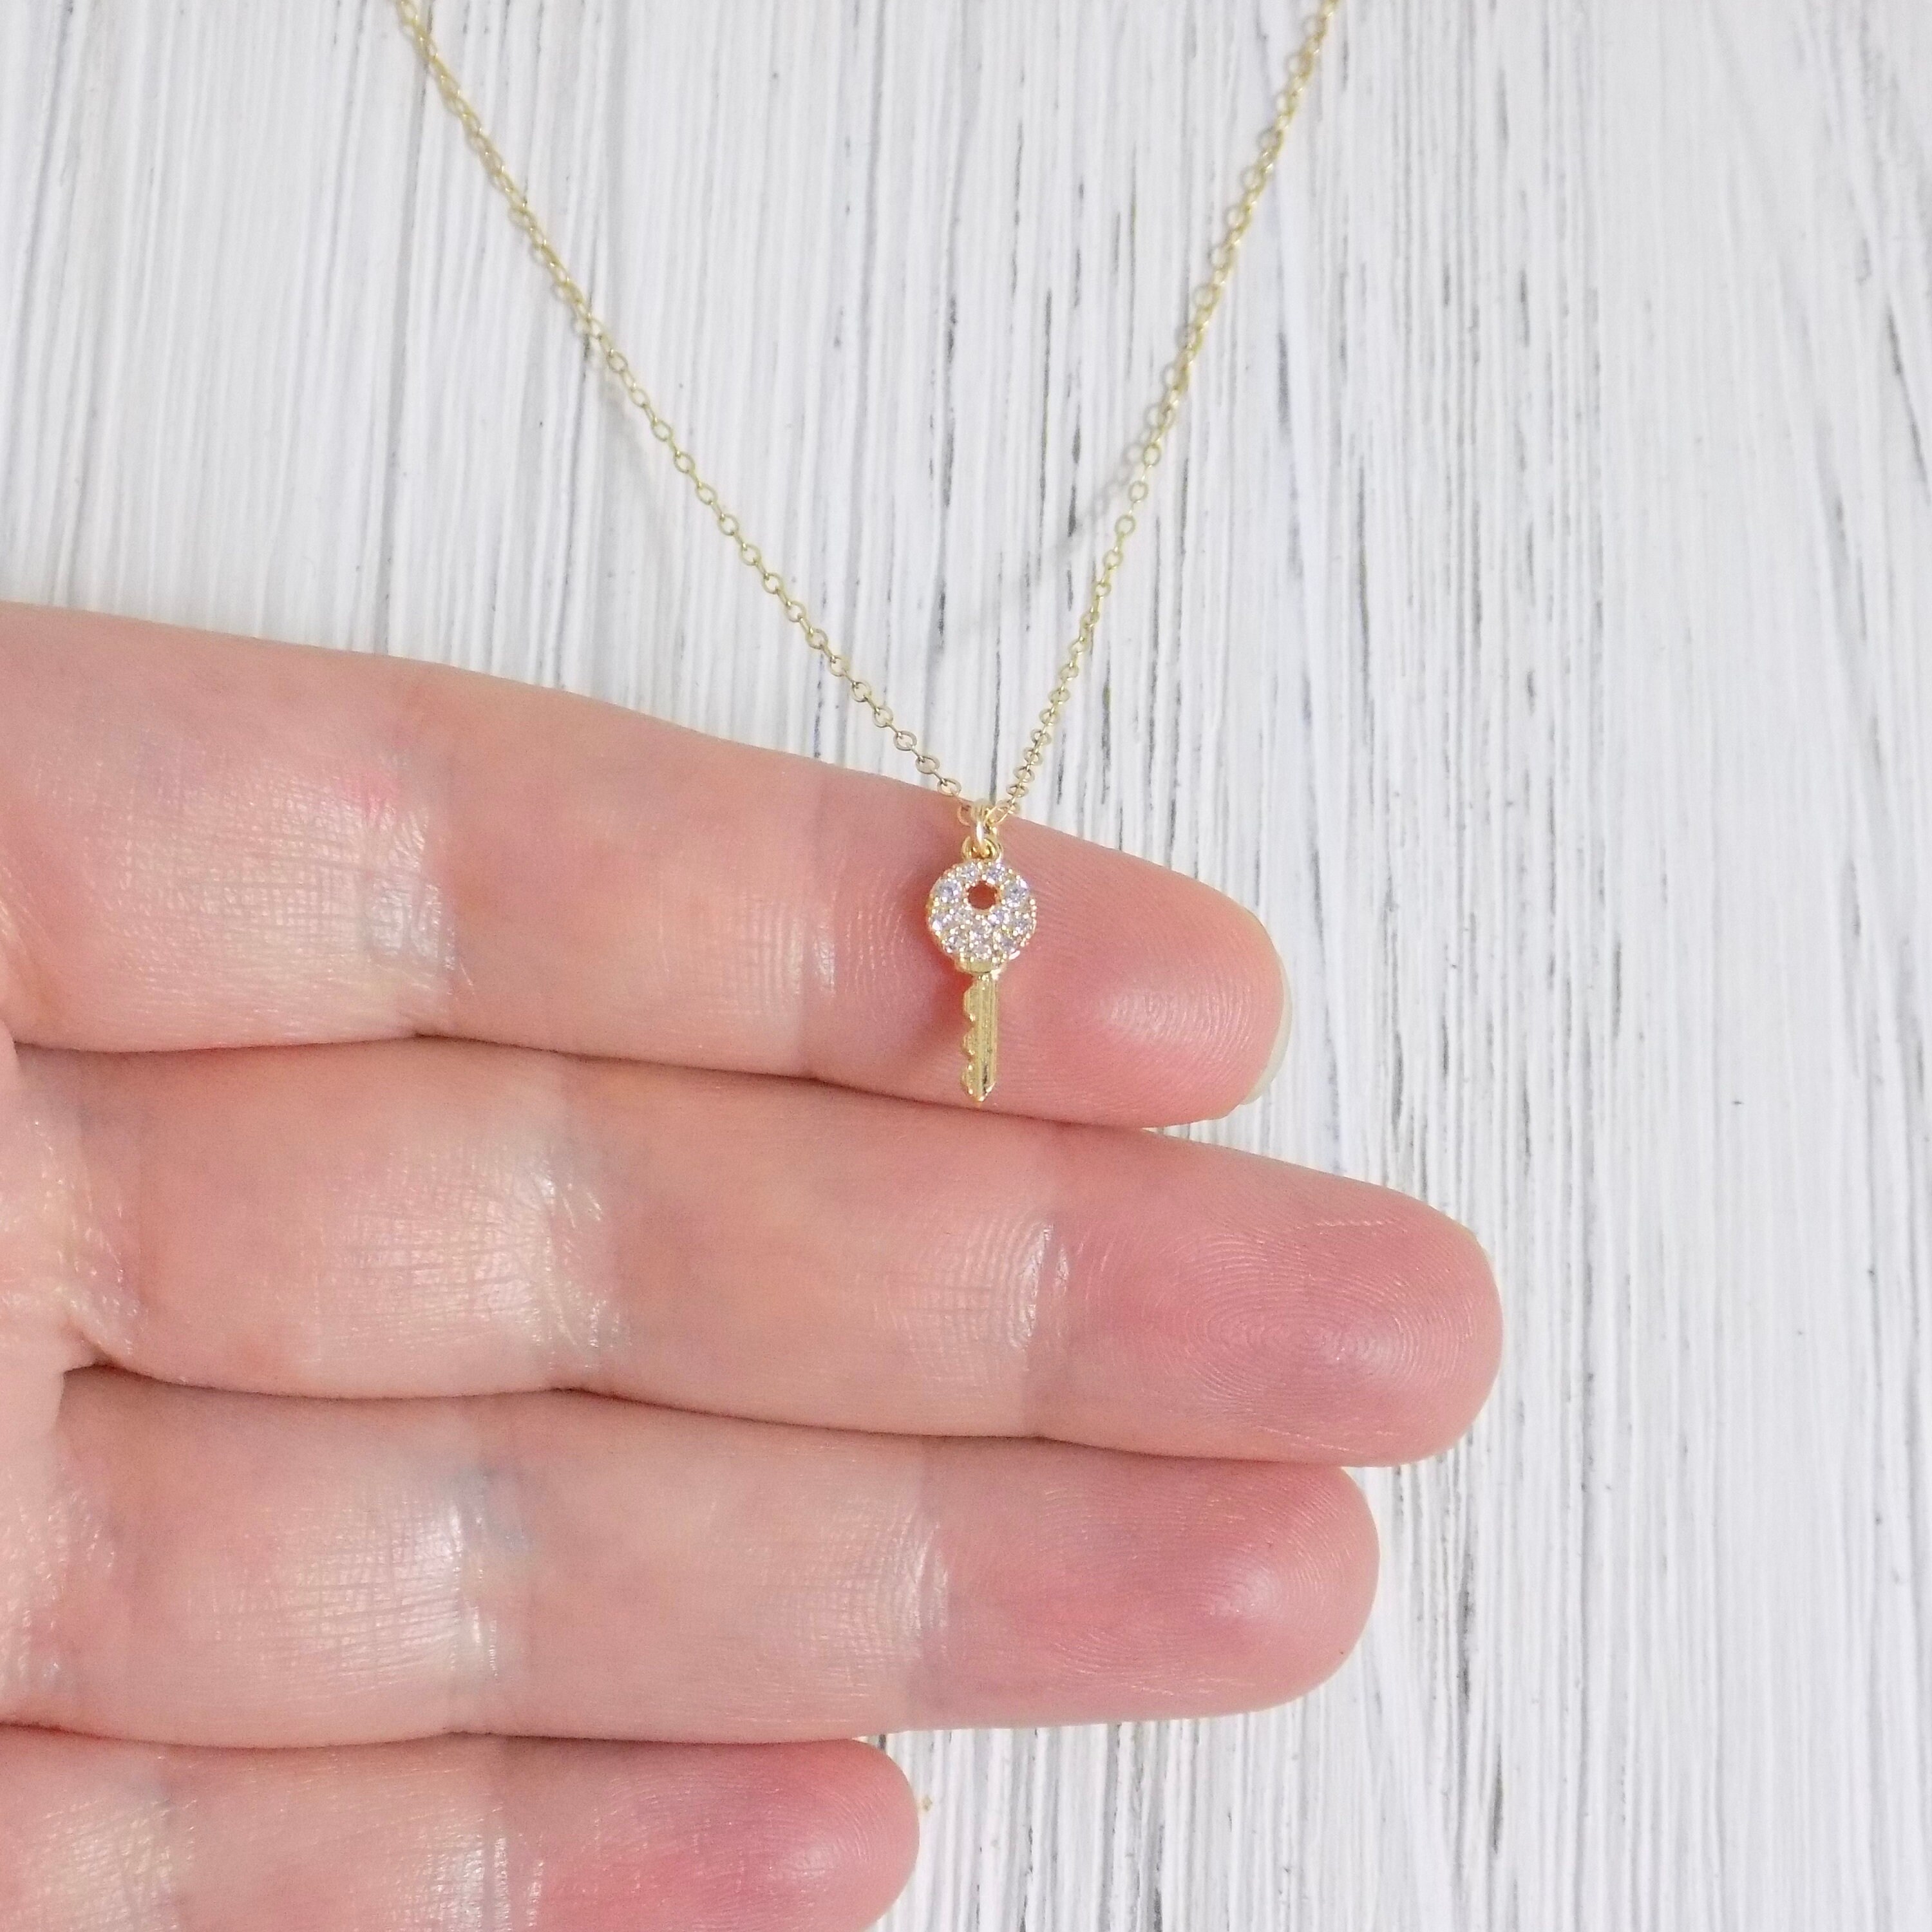 Tiny Gold Classic Key Necklace, Gold Plated Sterling Silver Key Necklace, Key Necklace, Layering Necklace Hand Made